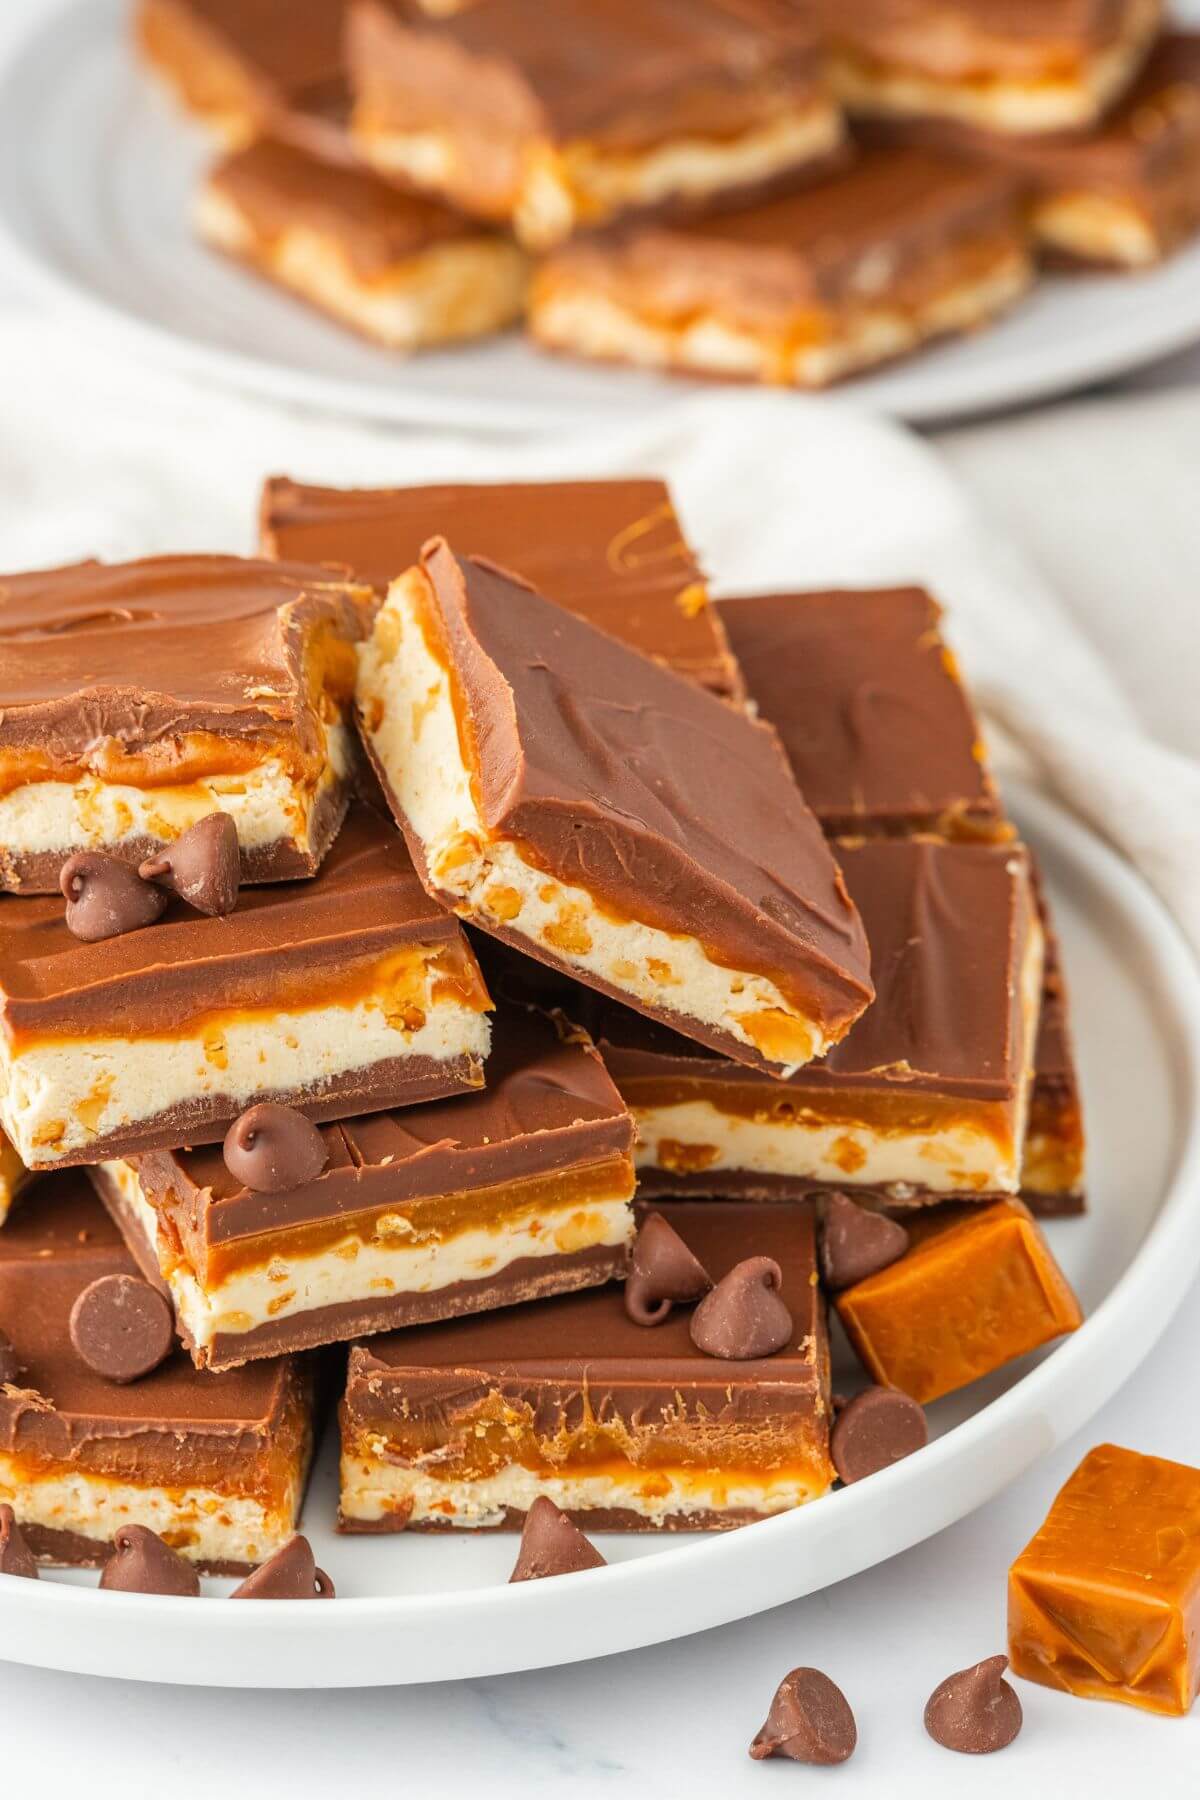 Two plates are full of layers of fudge bars.